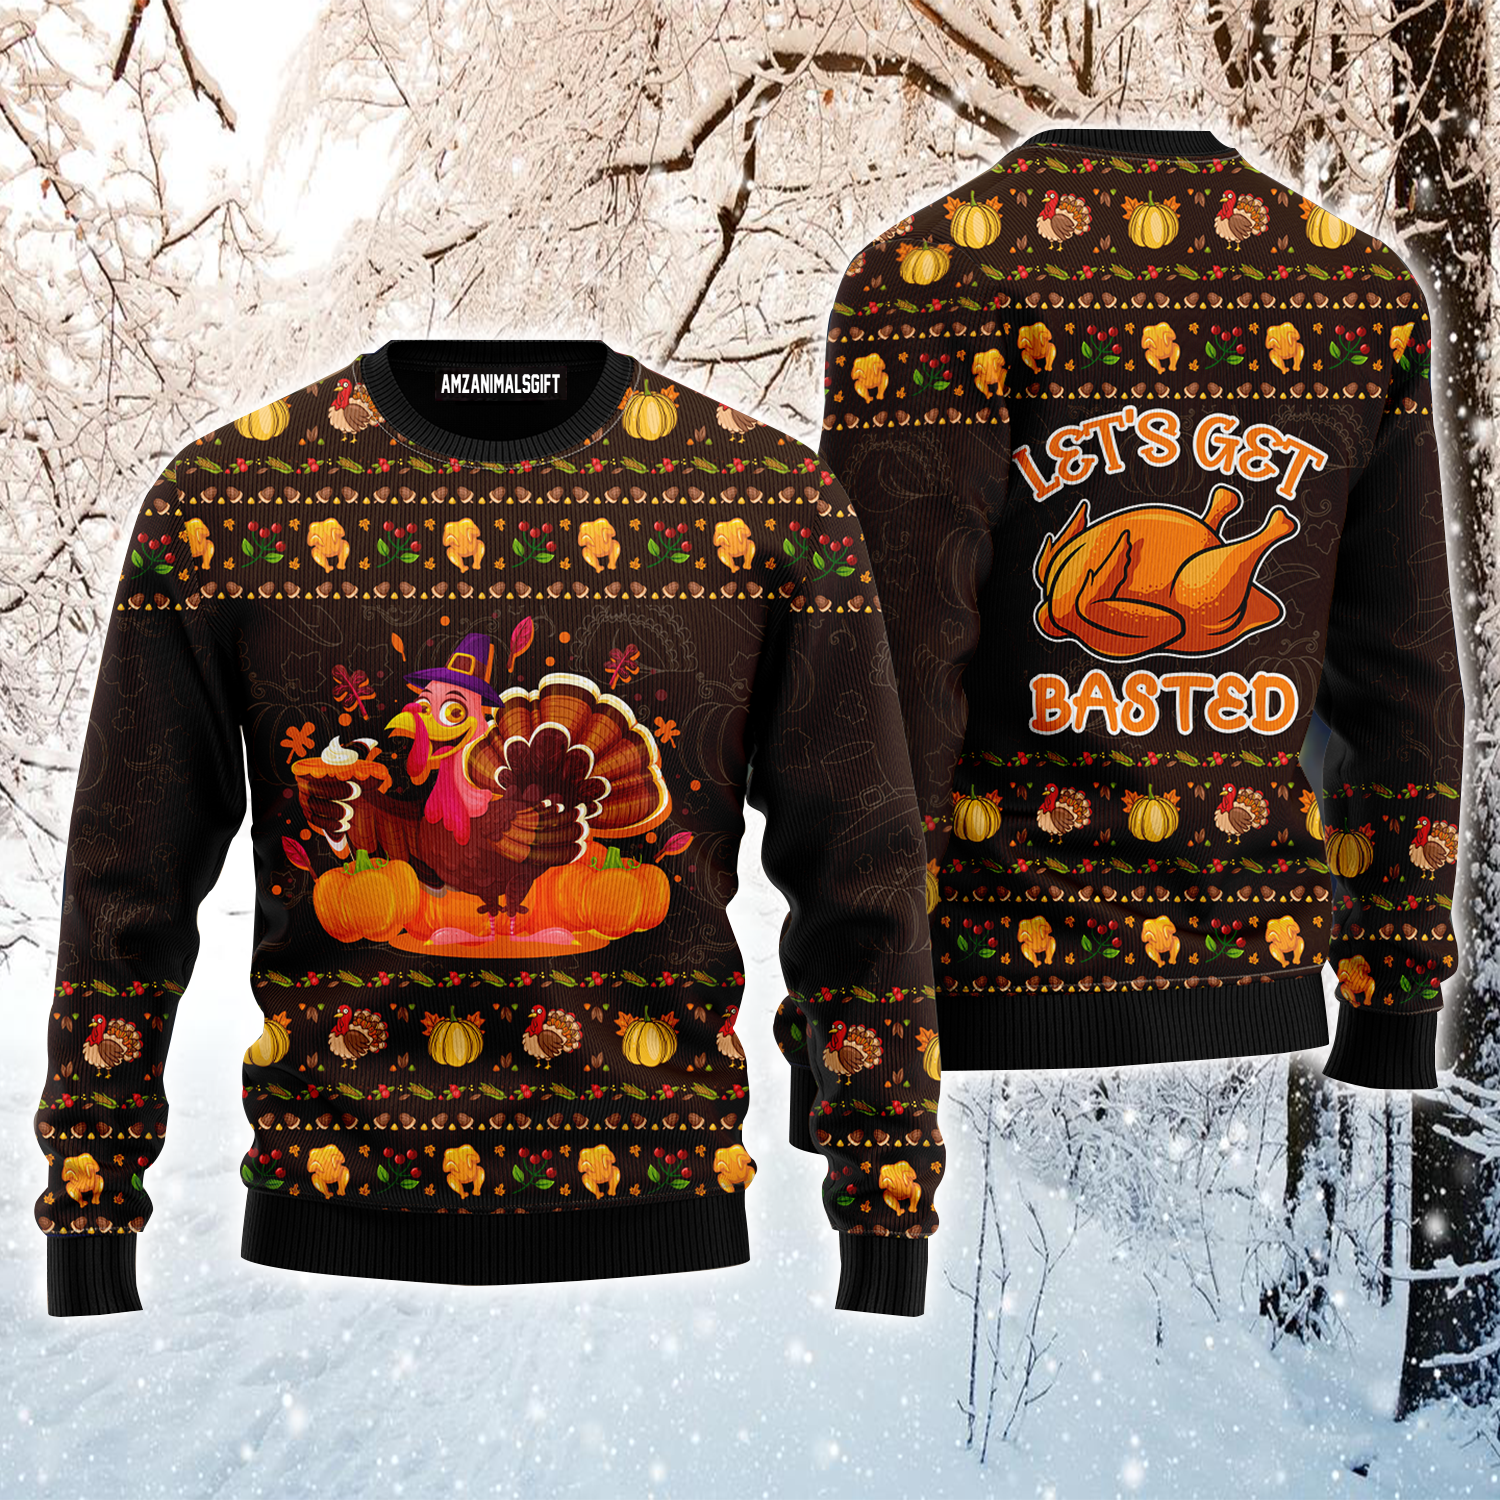 Thanksgiving Ugly Sweater, Lets Get Basted Turkey Ugly Sweater, Funny Chicken Pattern Brown Sweater For Men & Women, Perfect Gift For Friends, Family